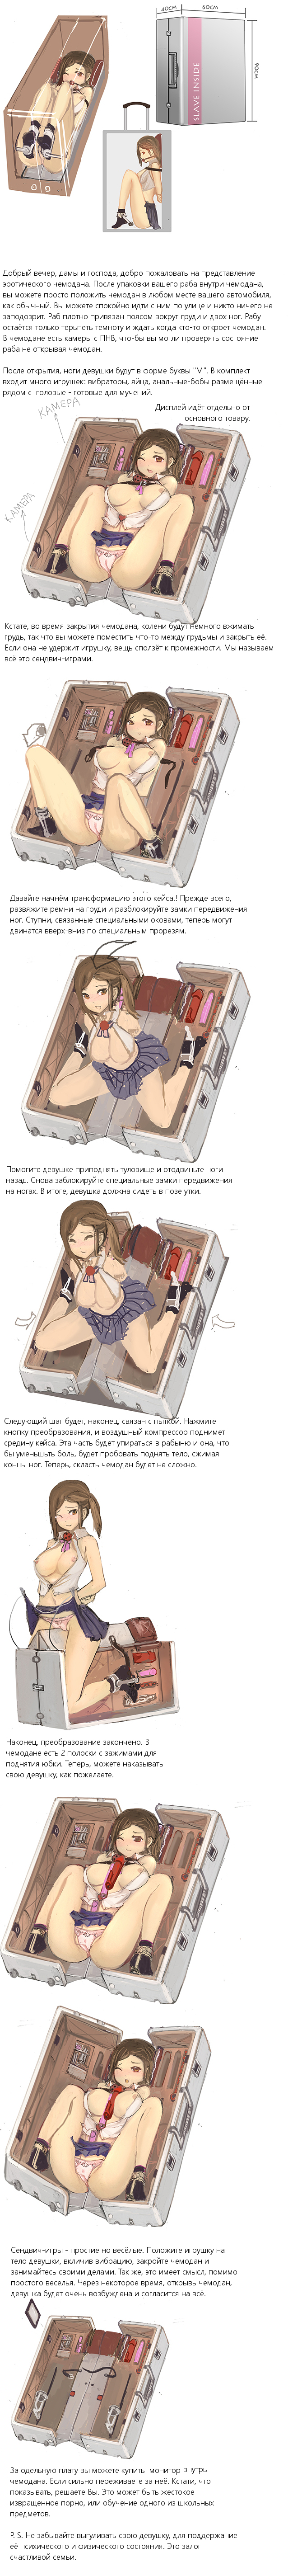 Suitcase for your girlfriend - NSFW, Longpost, Toys, Interesting